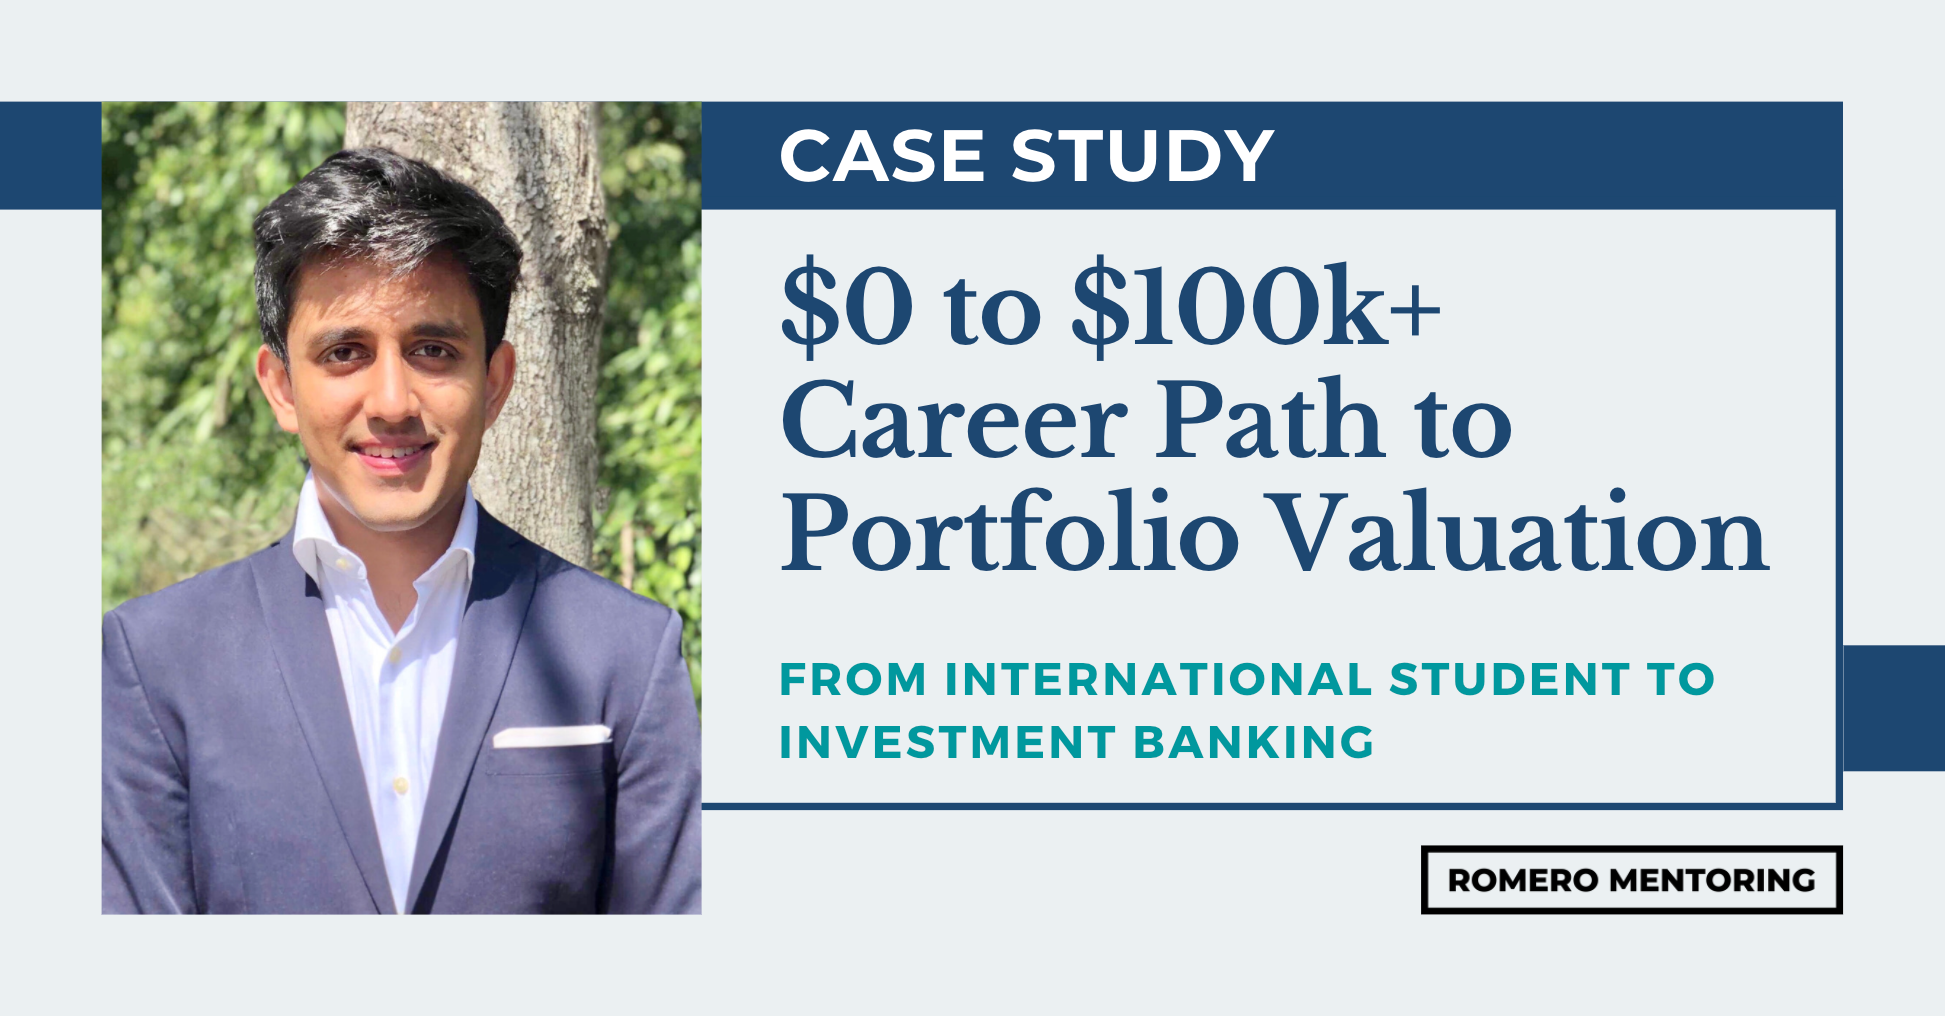 APP Student Goes From $0 to $100k+ Salary; Career Path to Portfolio Valuation